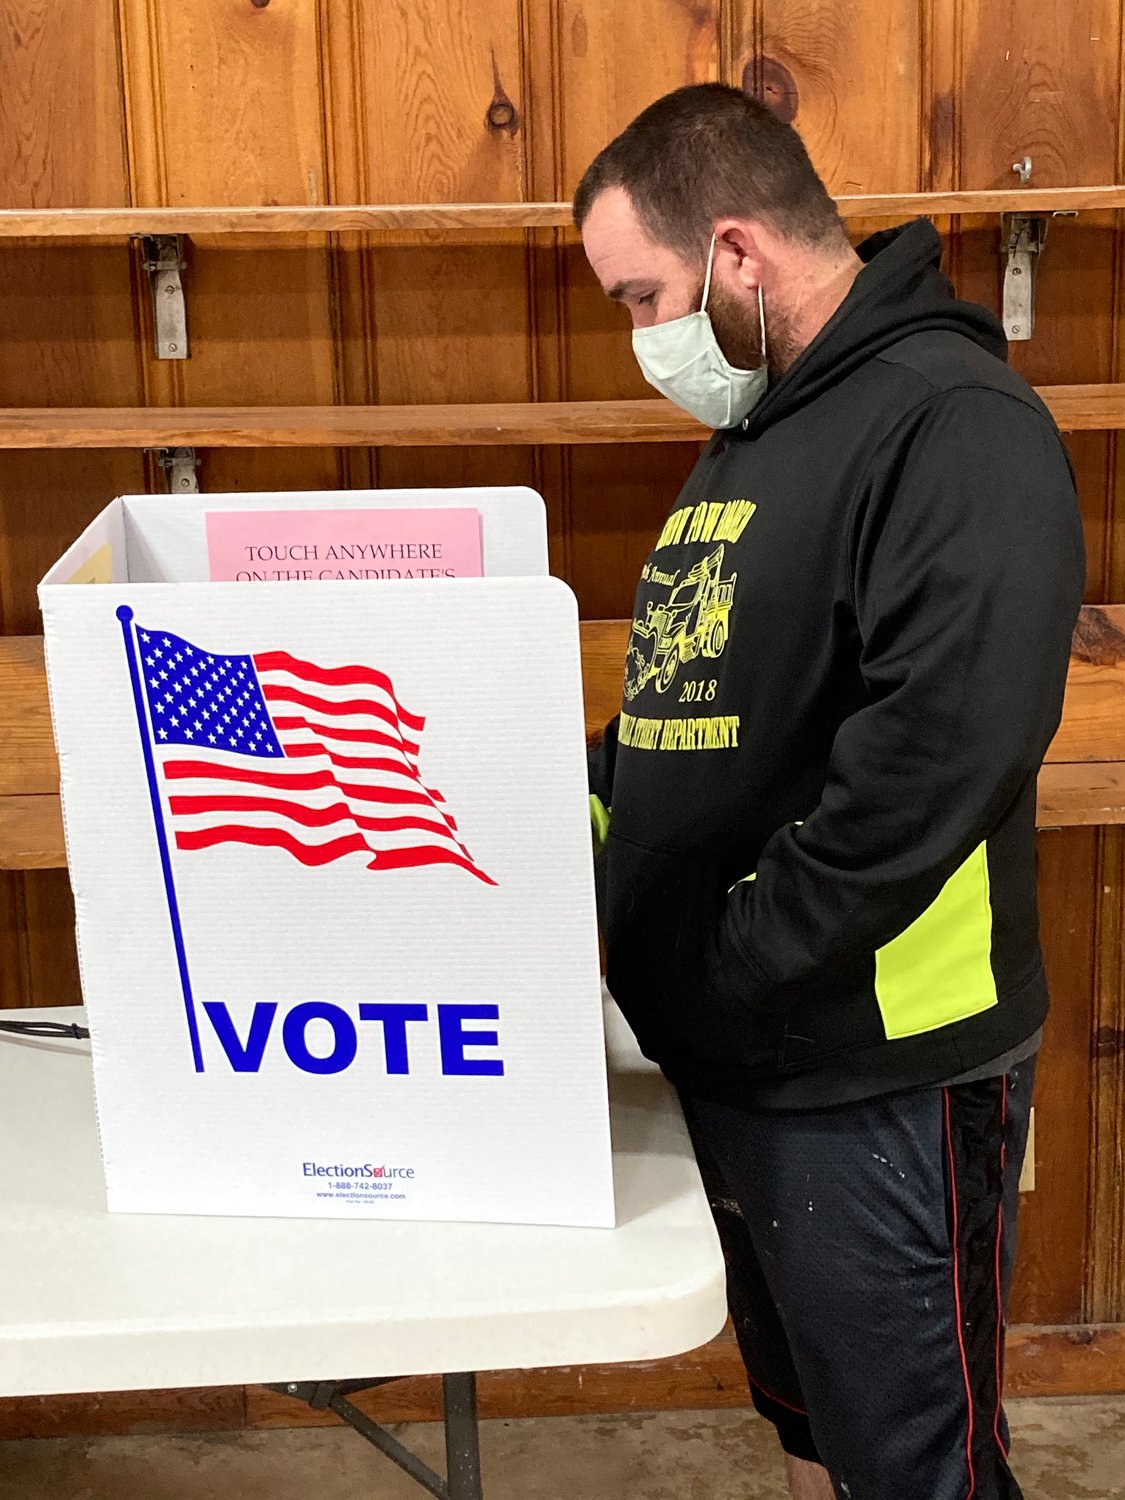 Ryan Fry votes at the Montgomery County Fairgrounds Tuesday. Nearly 400 people had cast ballots in the 4-H Building by late morning.